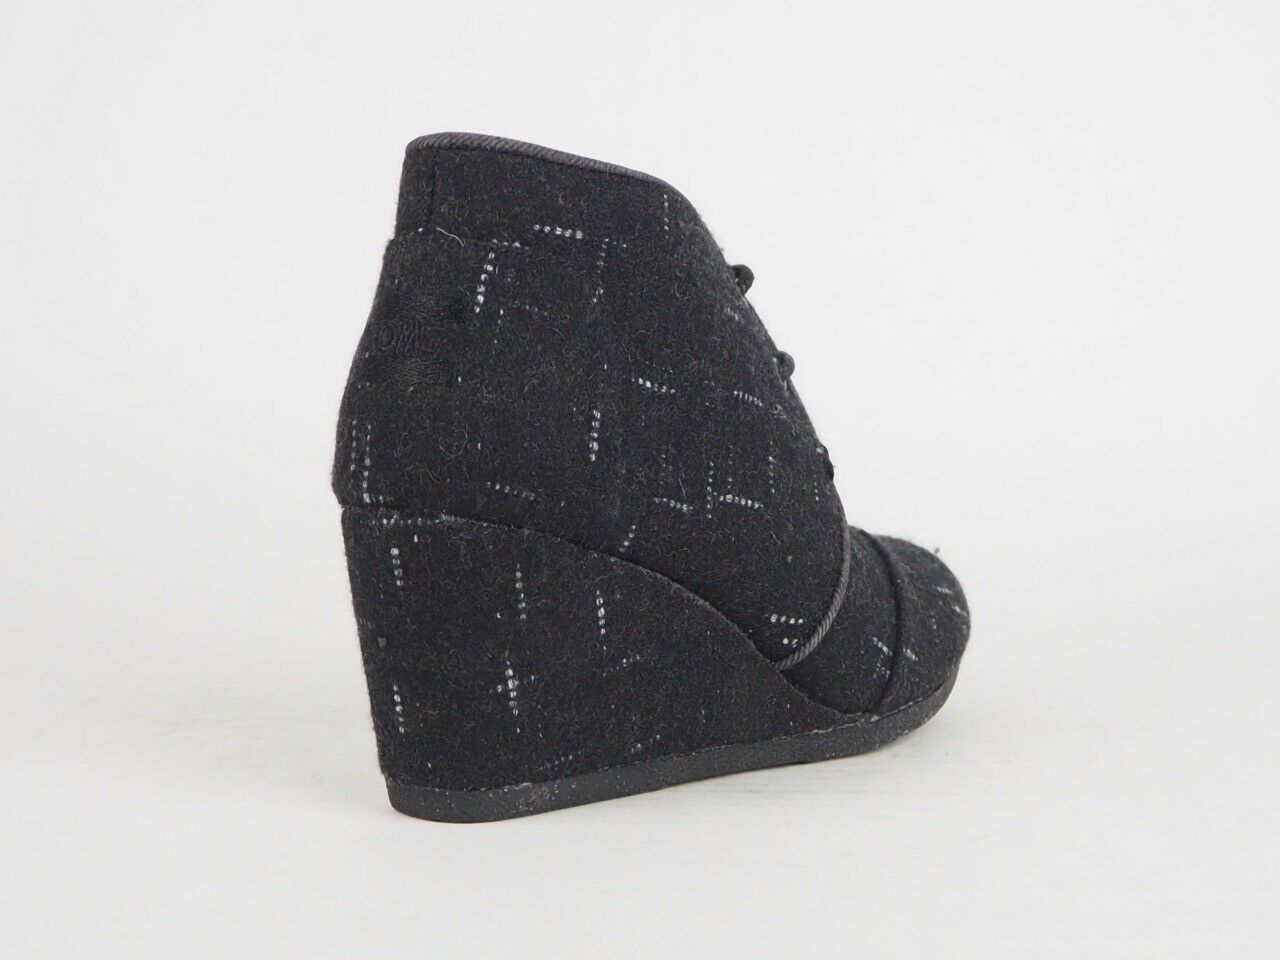 Girls Toms Desert Wedge Black Dotted Wool Lace Up Chukka Boot Uk 3.5 - London Top Style